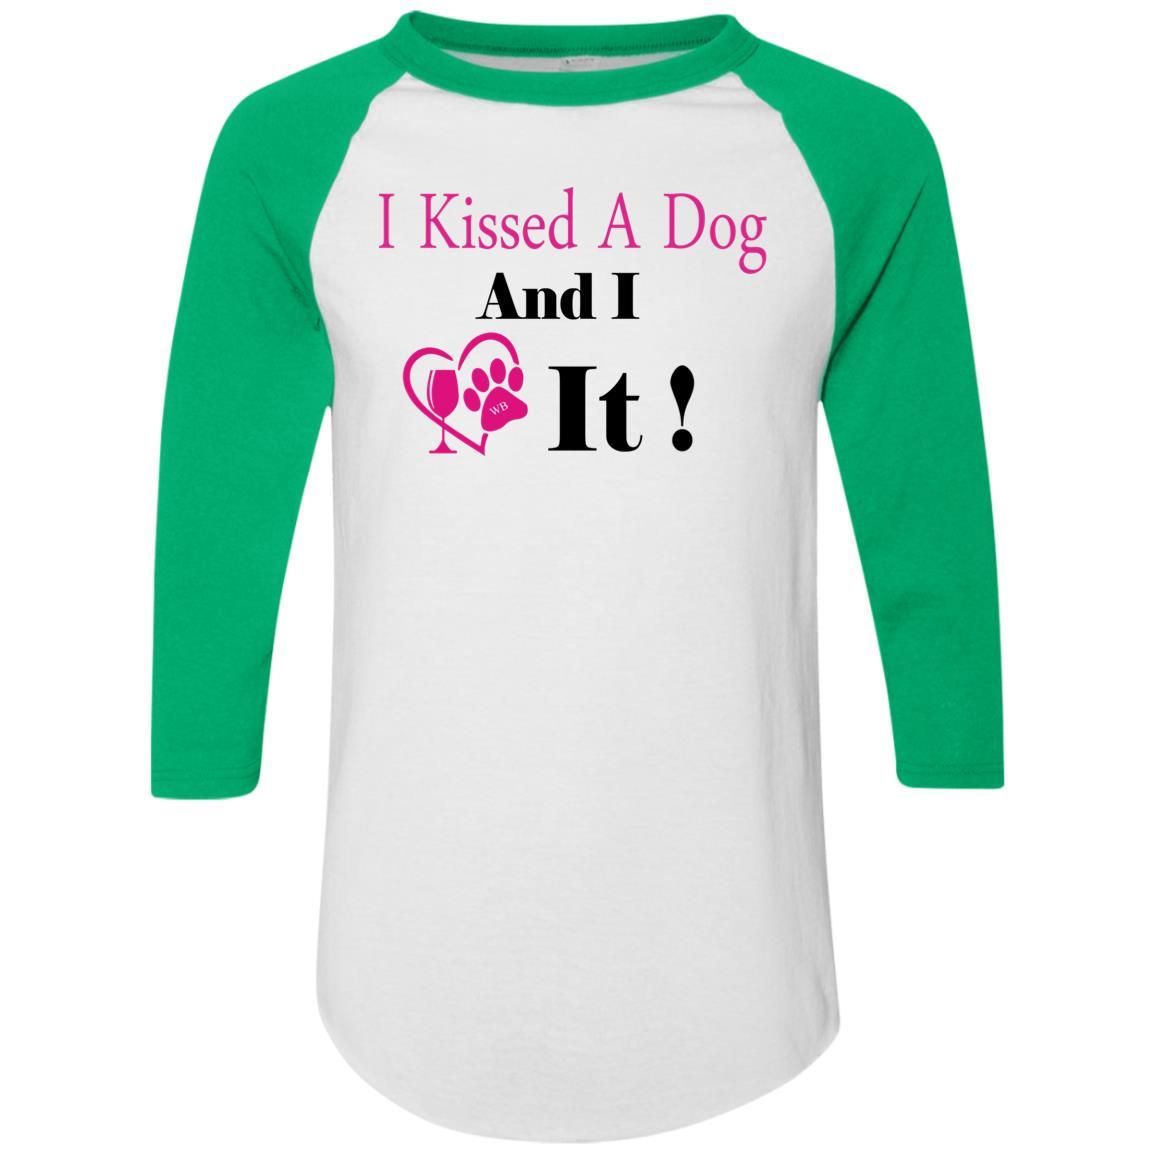 T-Shirts White/Kelly / S WineyBitches.co "I Kissed A Dog And I Loved It:" Colorblock Raglan Jersey WineyBitchesCo